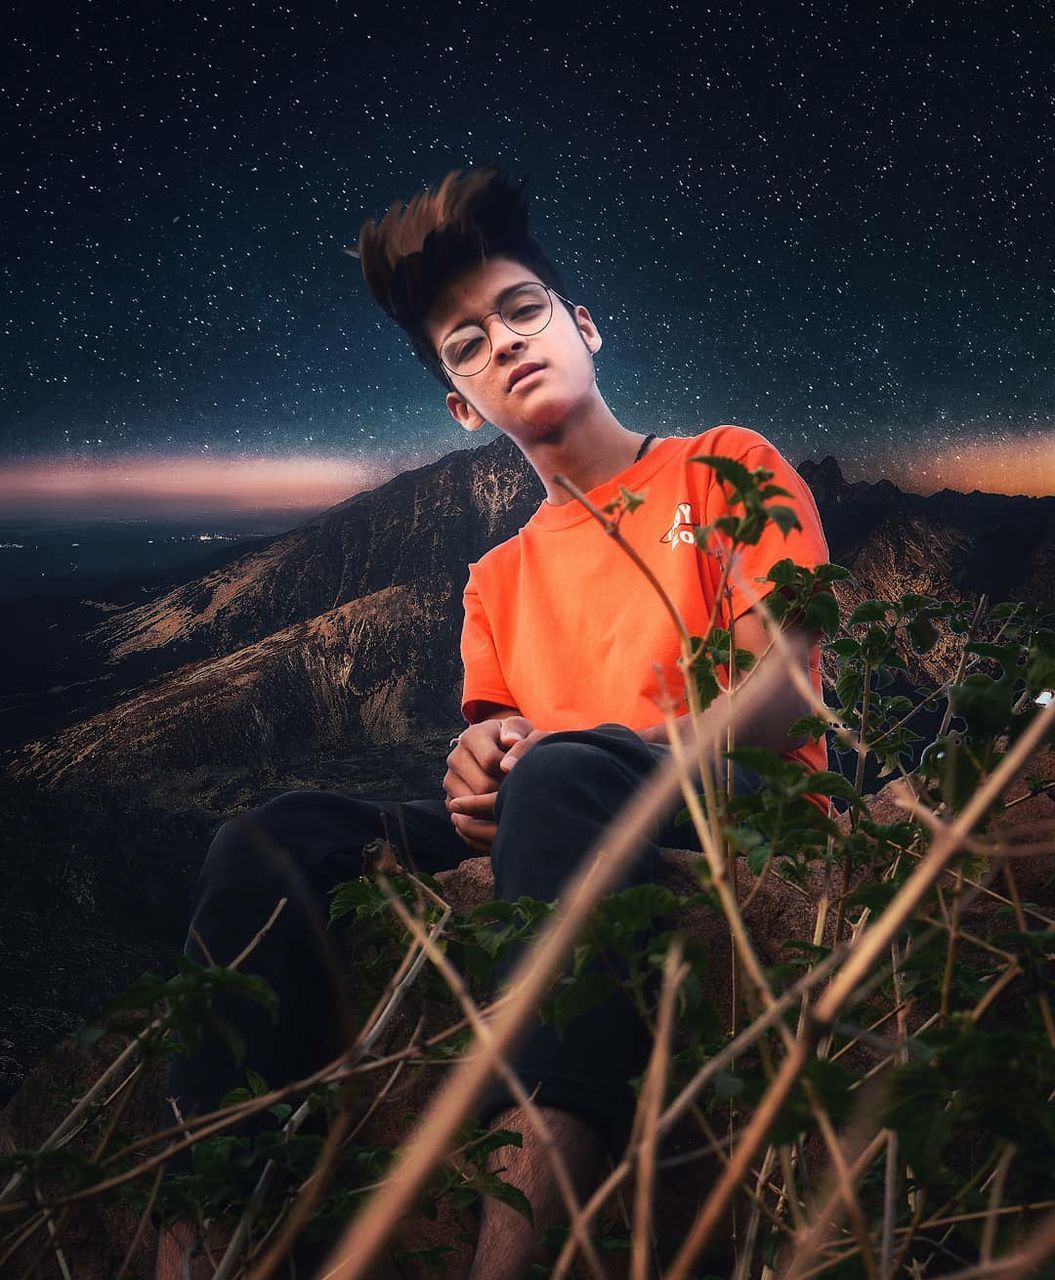 one person, night, sky, nature, young adult, star - space, scenics - nature, real people, beauty in nature, leisure activity, field, land, three quarter length, lifestyles, space, sitting, young men, front view, casual clothing, plant, astronomy, outdoors